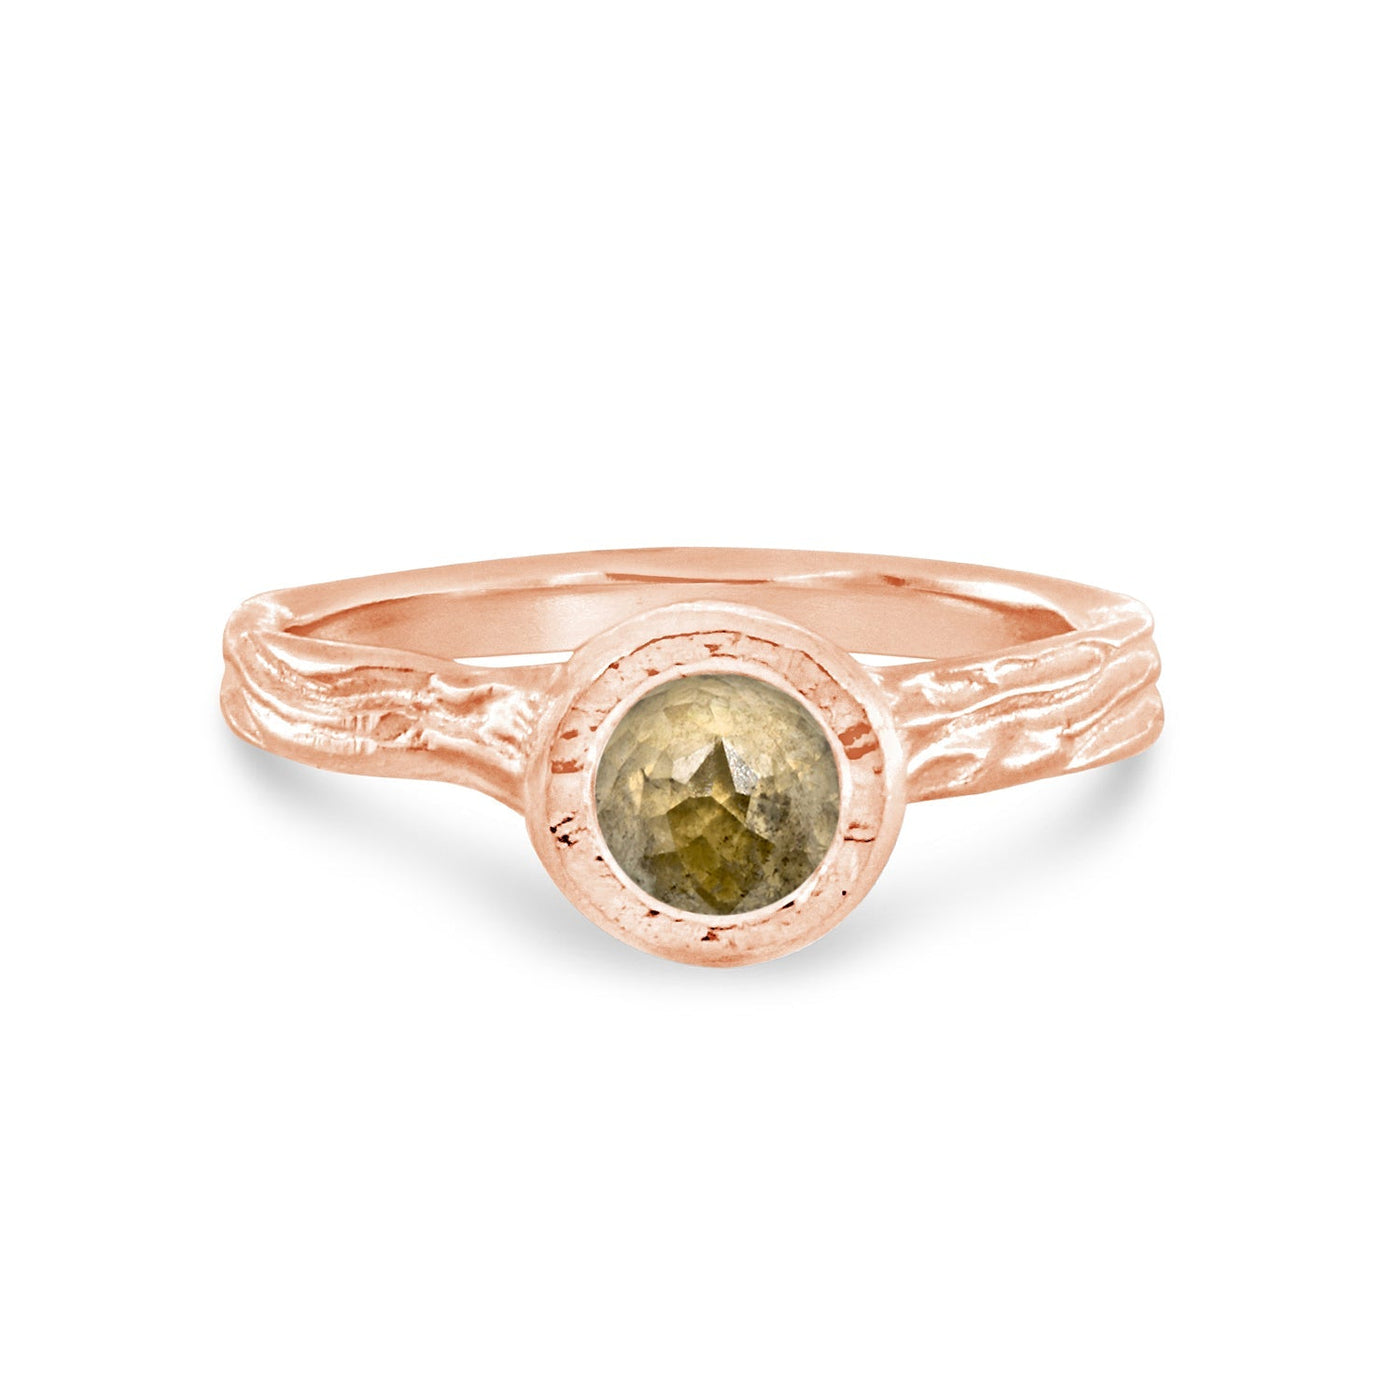 Roots ring bands look like branches or a branches ring with a rustic diamond in certified recycled gold by WEND Jewelry #gemstone-size_5mm